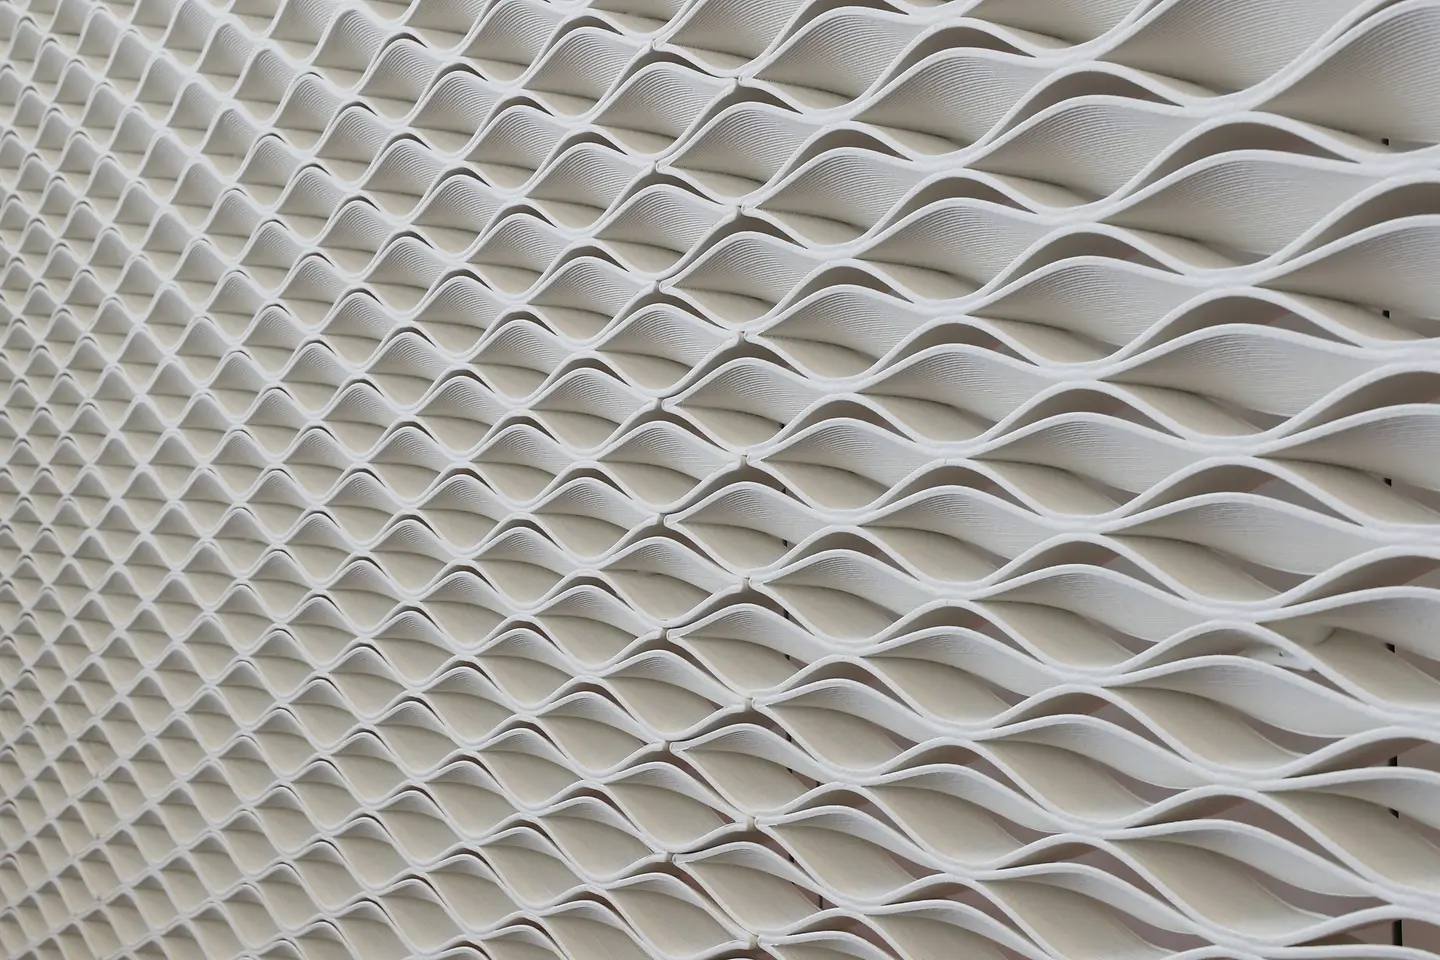 
The 3D Printed wall in the Henkel Innovation and Interaction Centre, made from Loctite products and designed by Jennings Design Studio, Dublin and Aectual, Netherlands.
